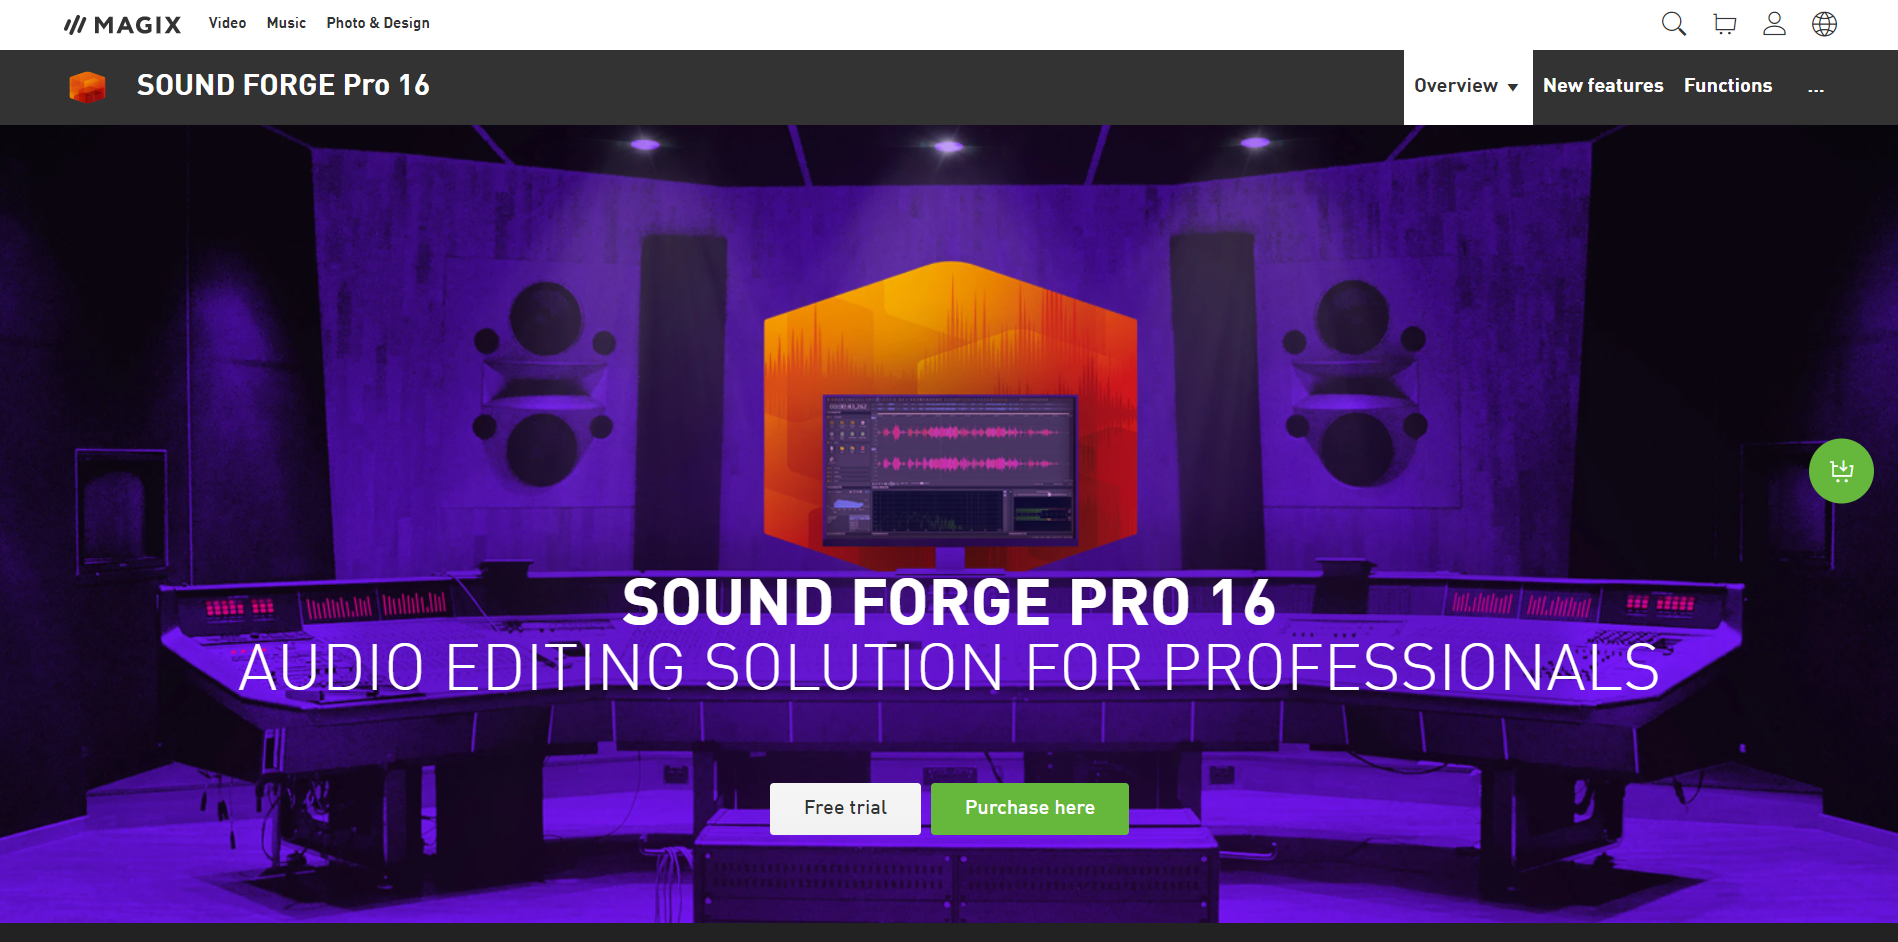 Sound Forge Pro main page